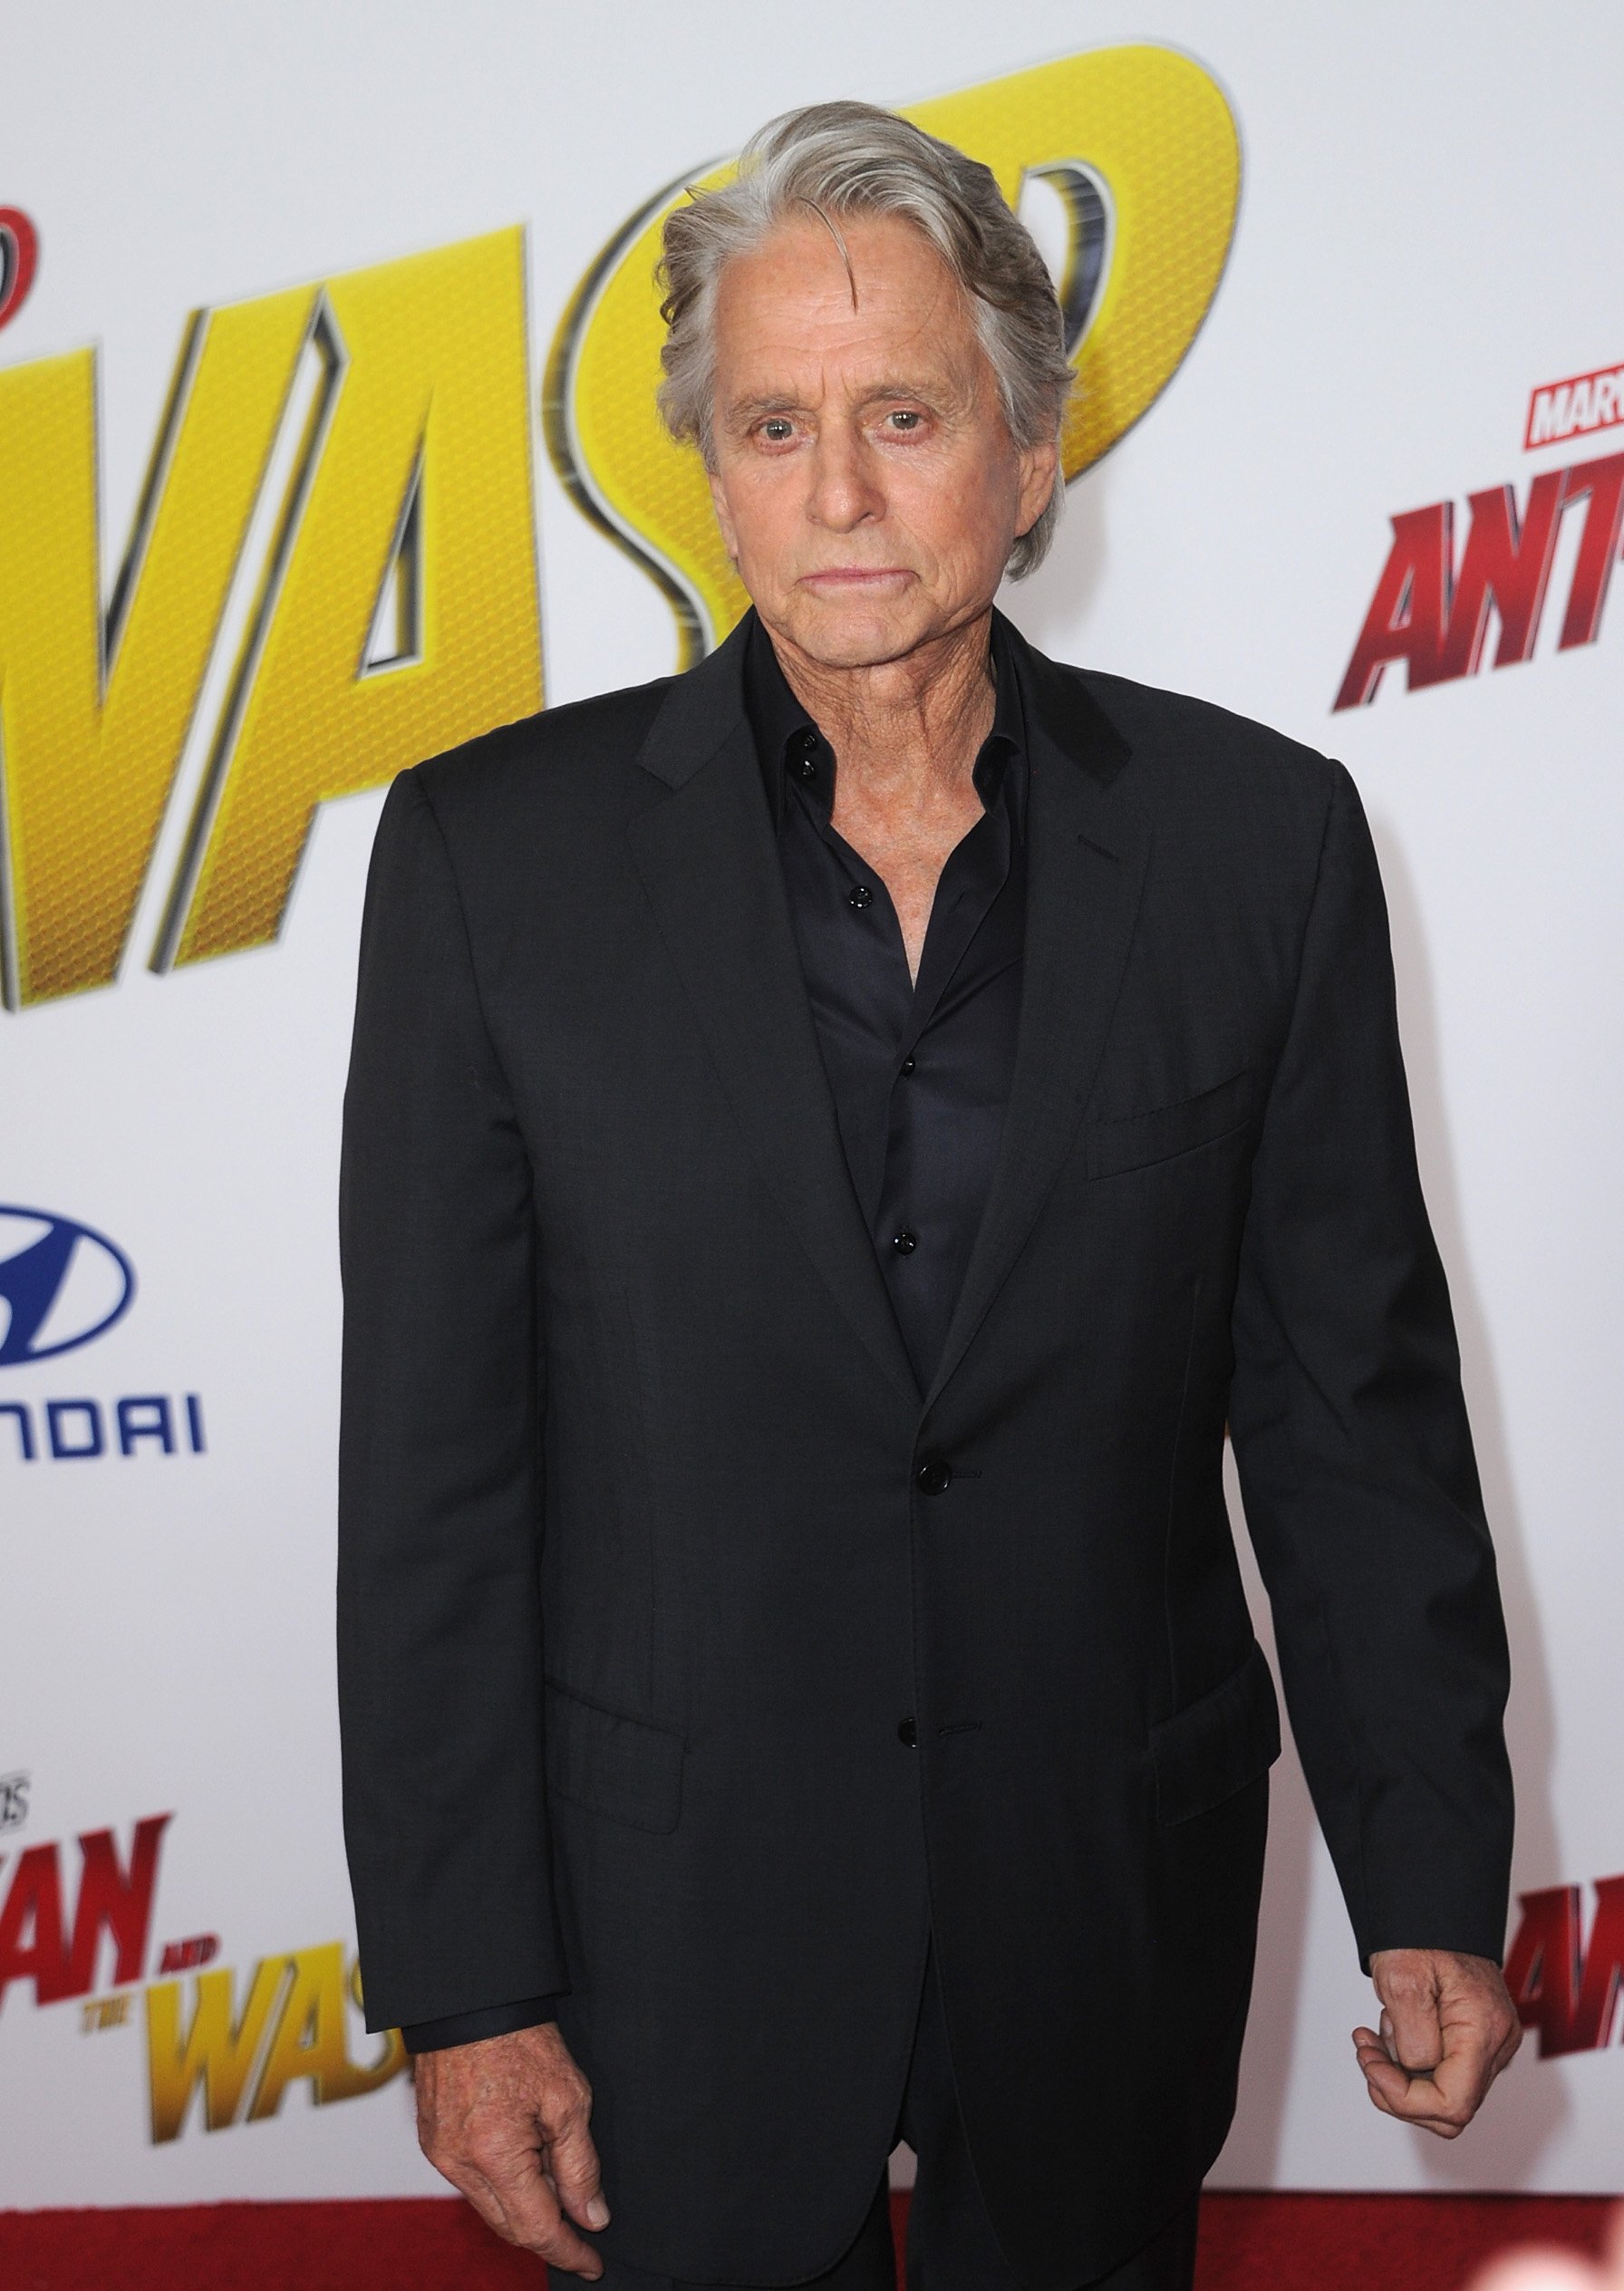 Michael Douglas at the premiere of Disney and Marvel's "Ant-Man And The Wasp" held at the El Capitan Theater on June 25, 2018 in Hollywood, California | Photo: Getty Images